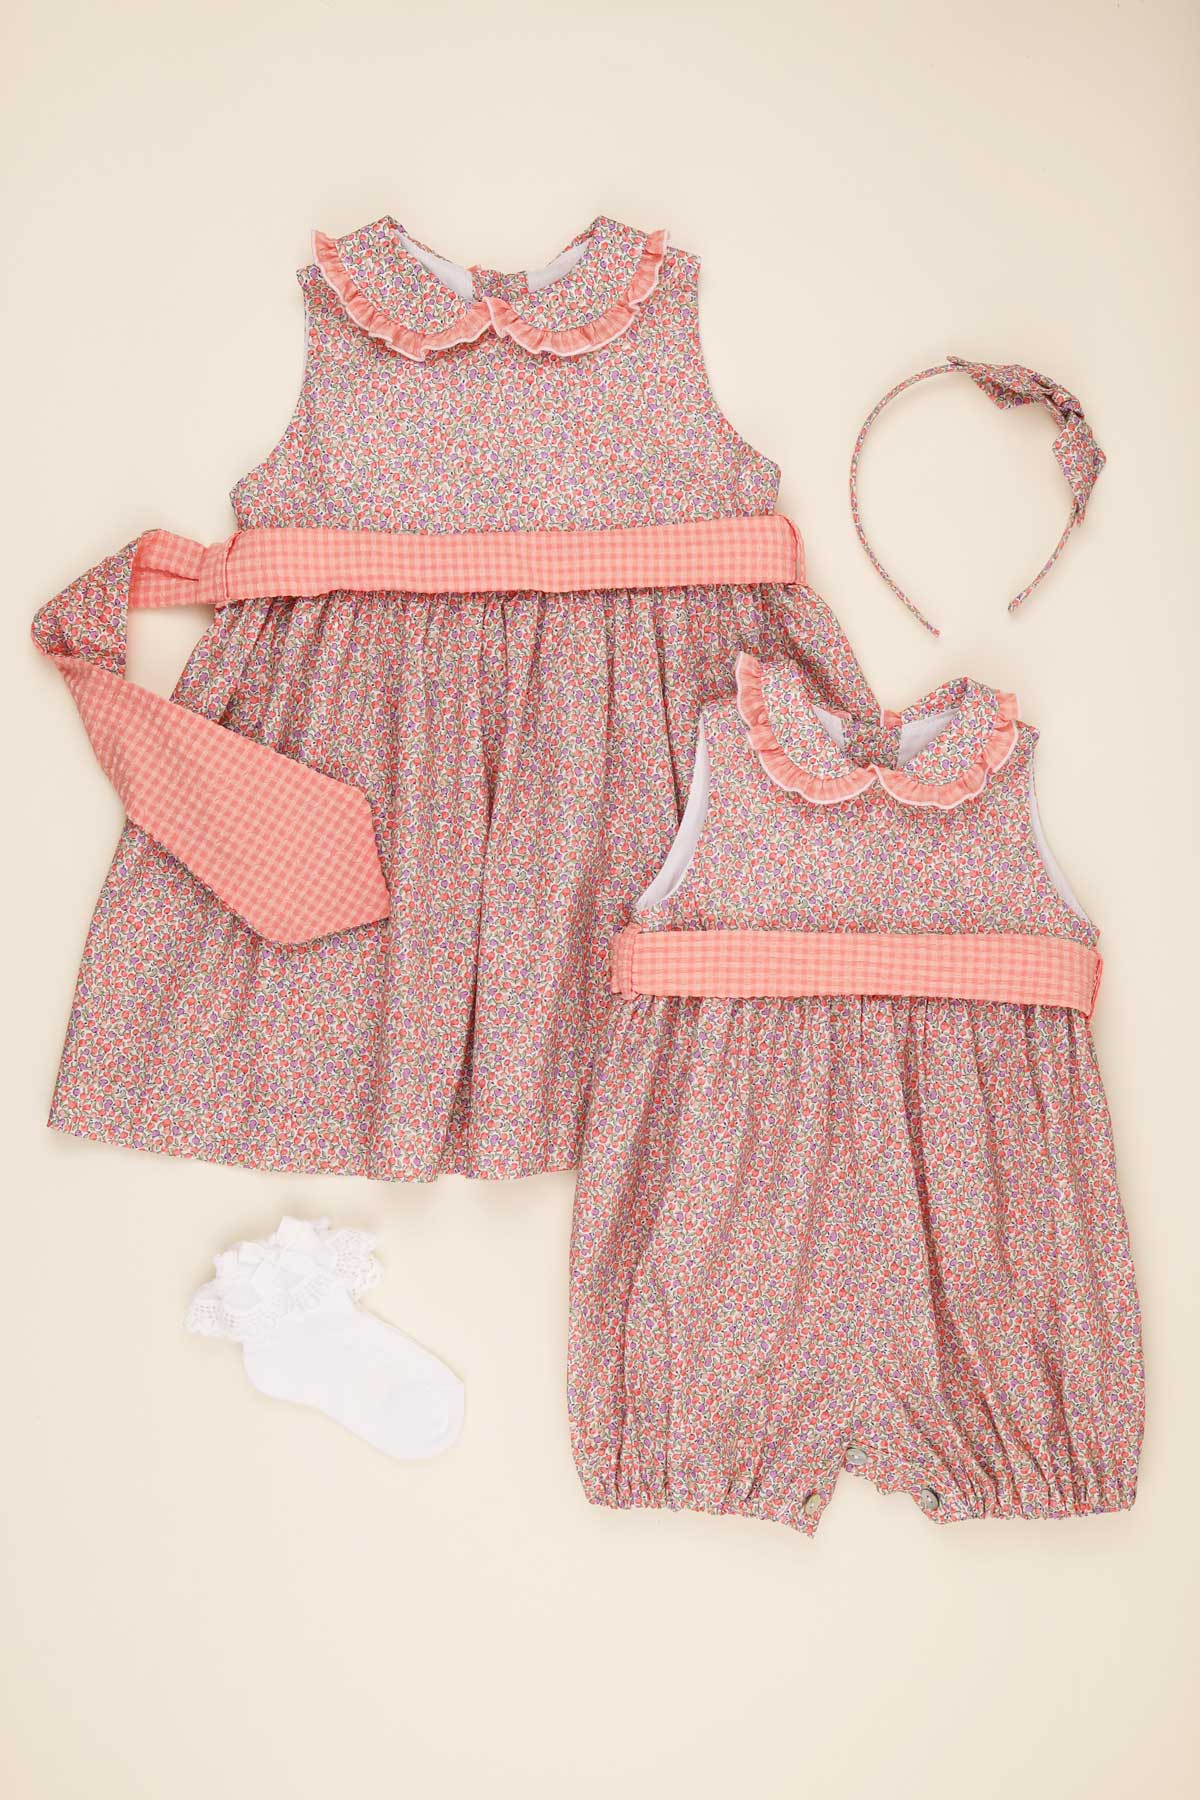 ditsy floral coral baby girl romper & girls dress flatlay